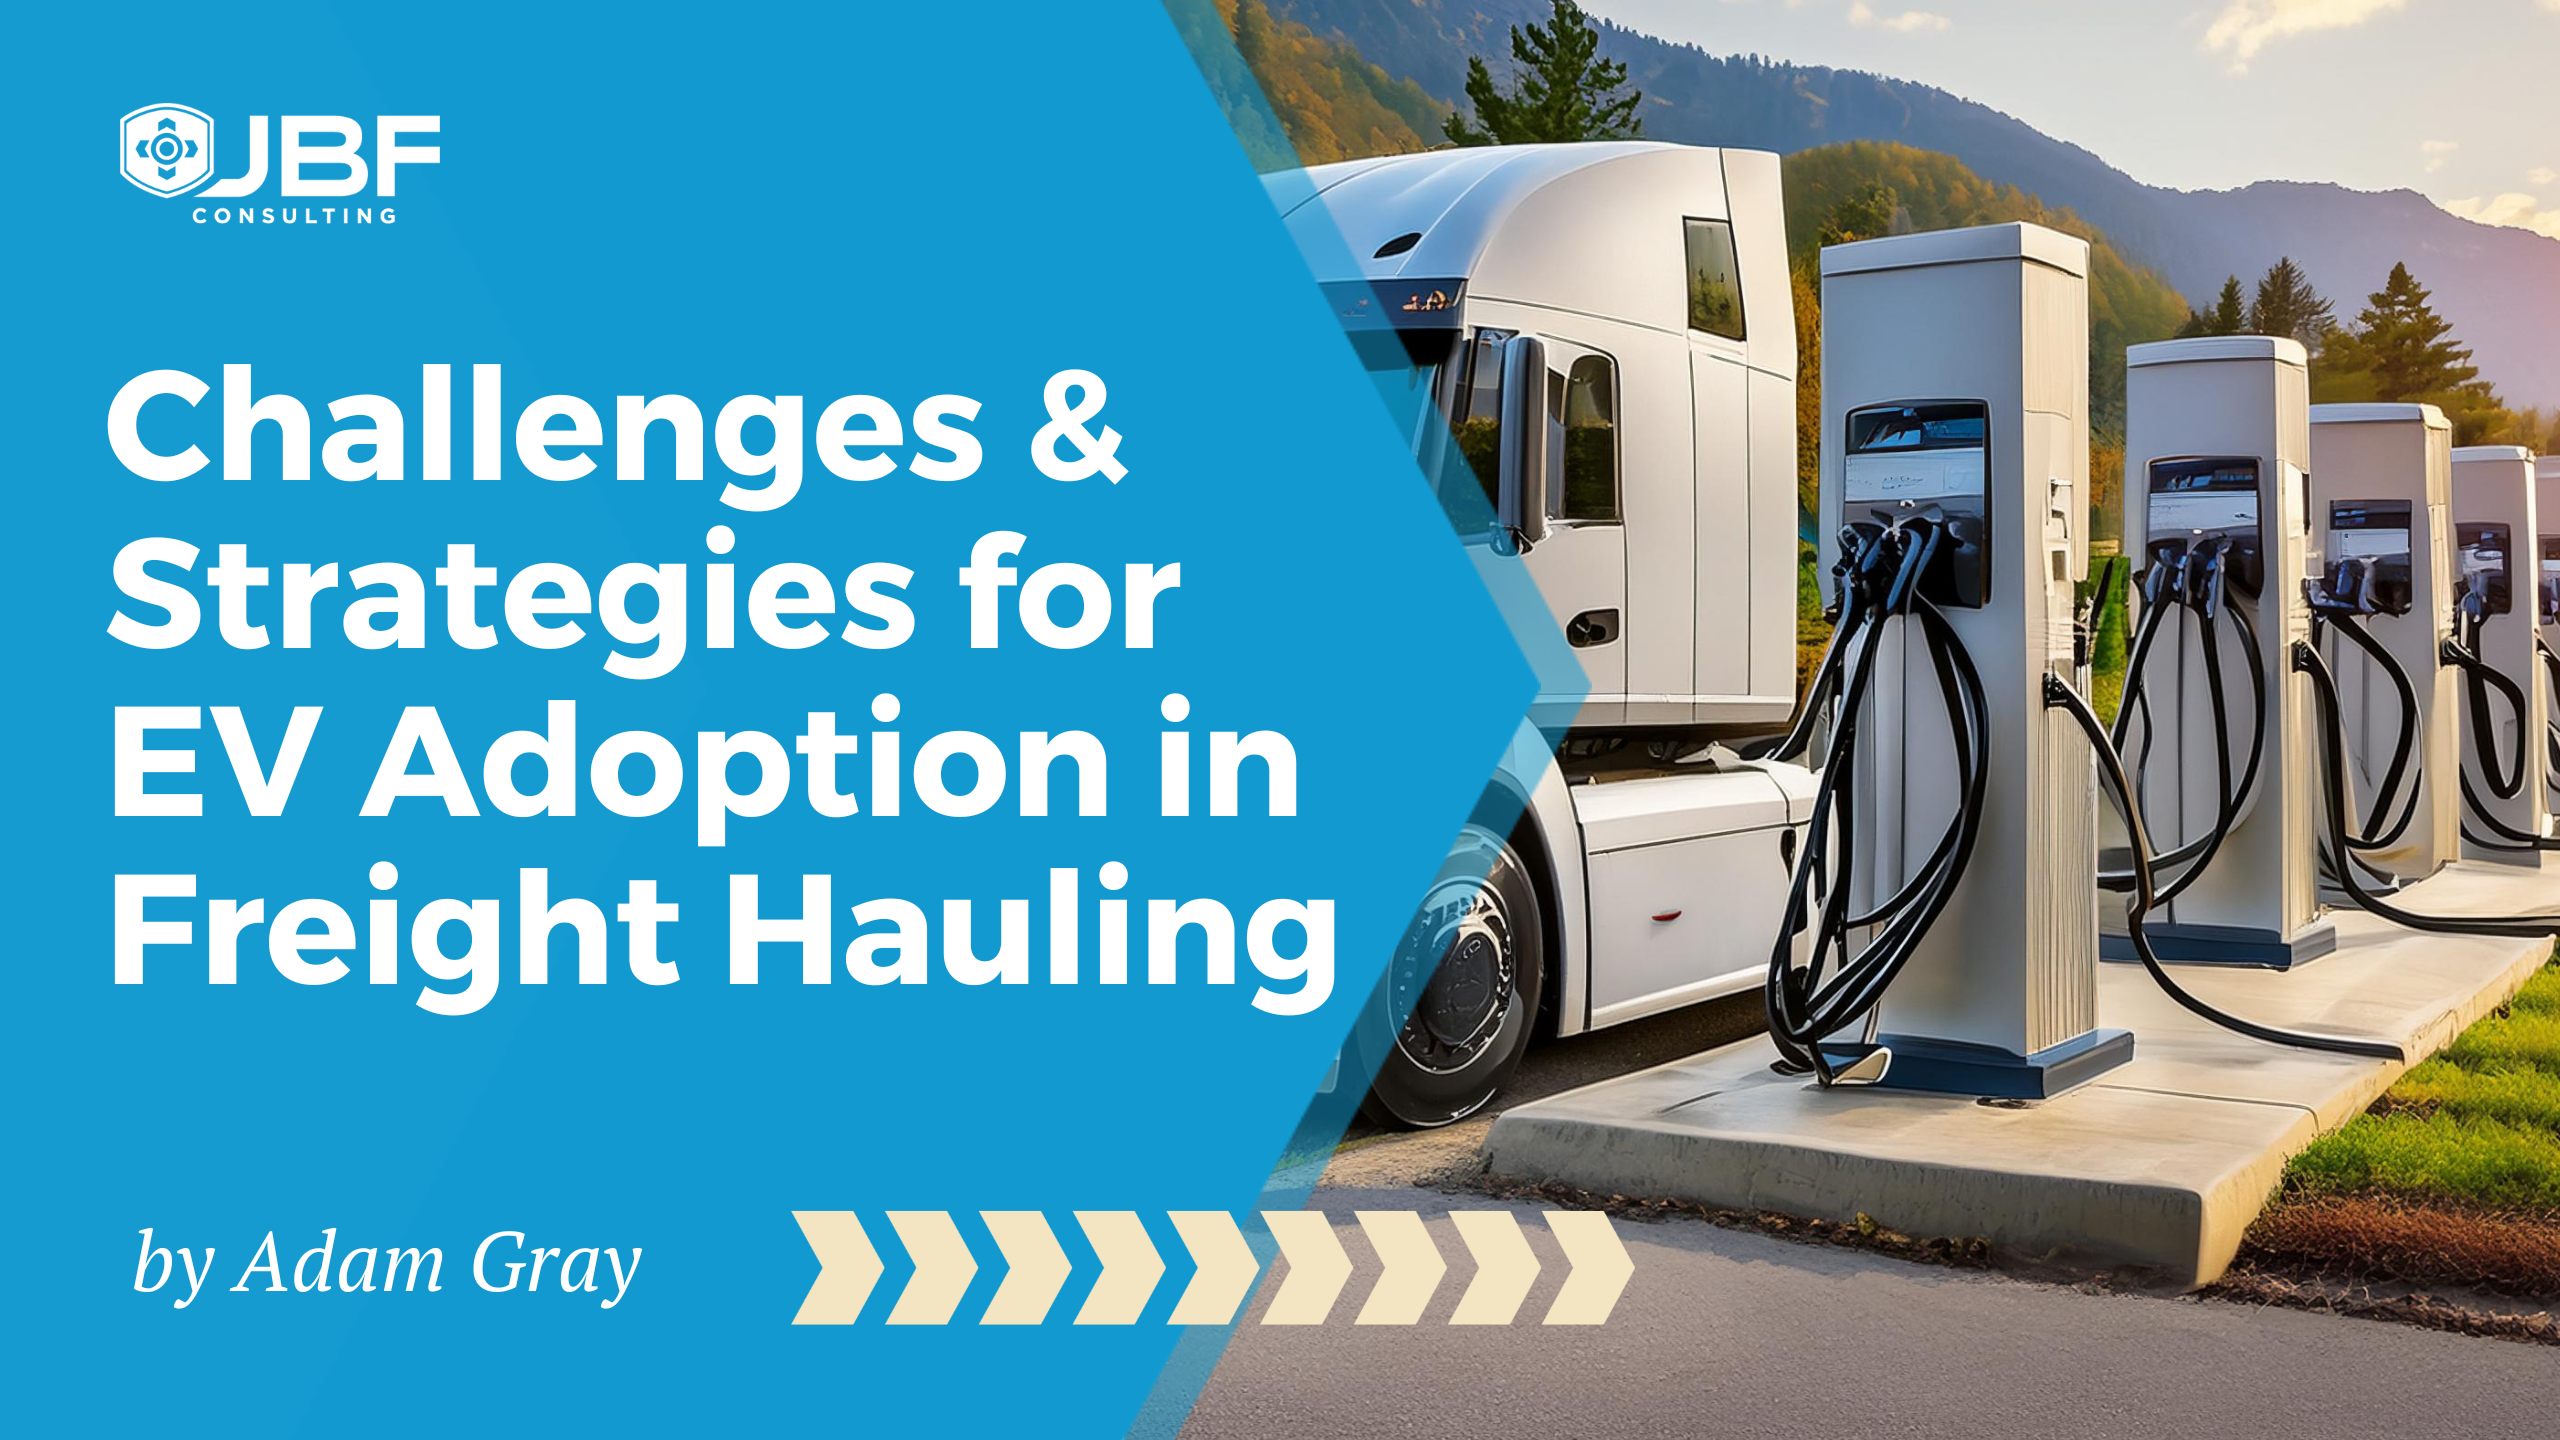 Challenges & Strategies for EV Adoption in Freight Hauling